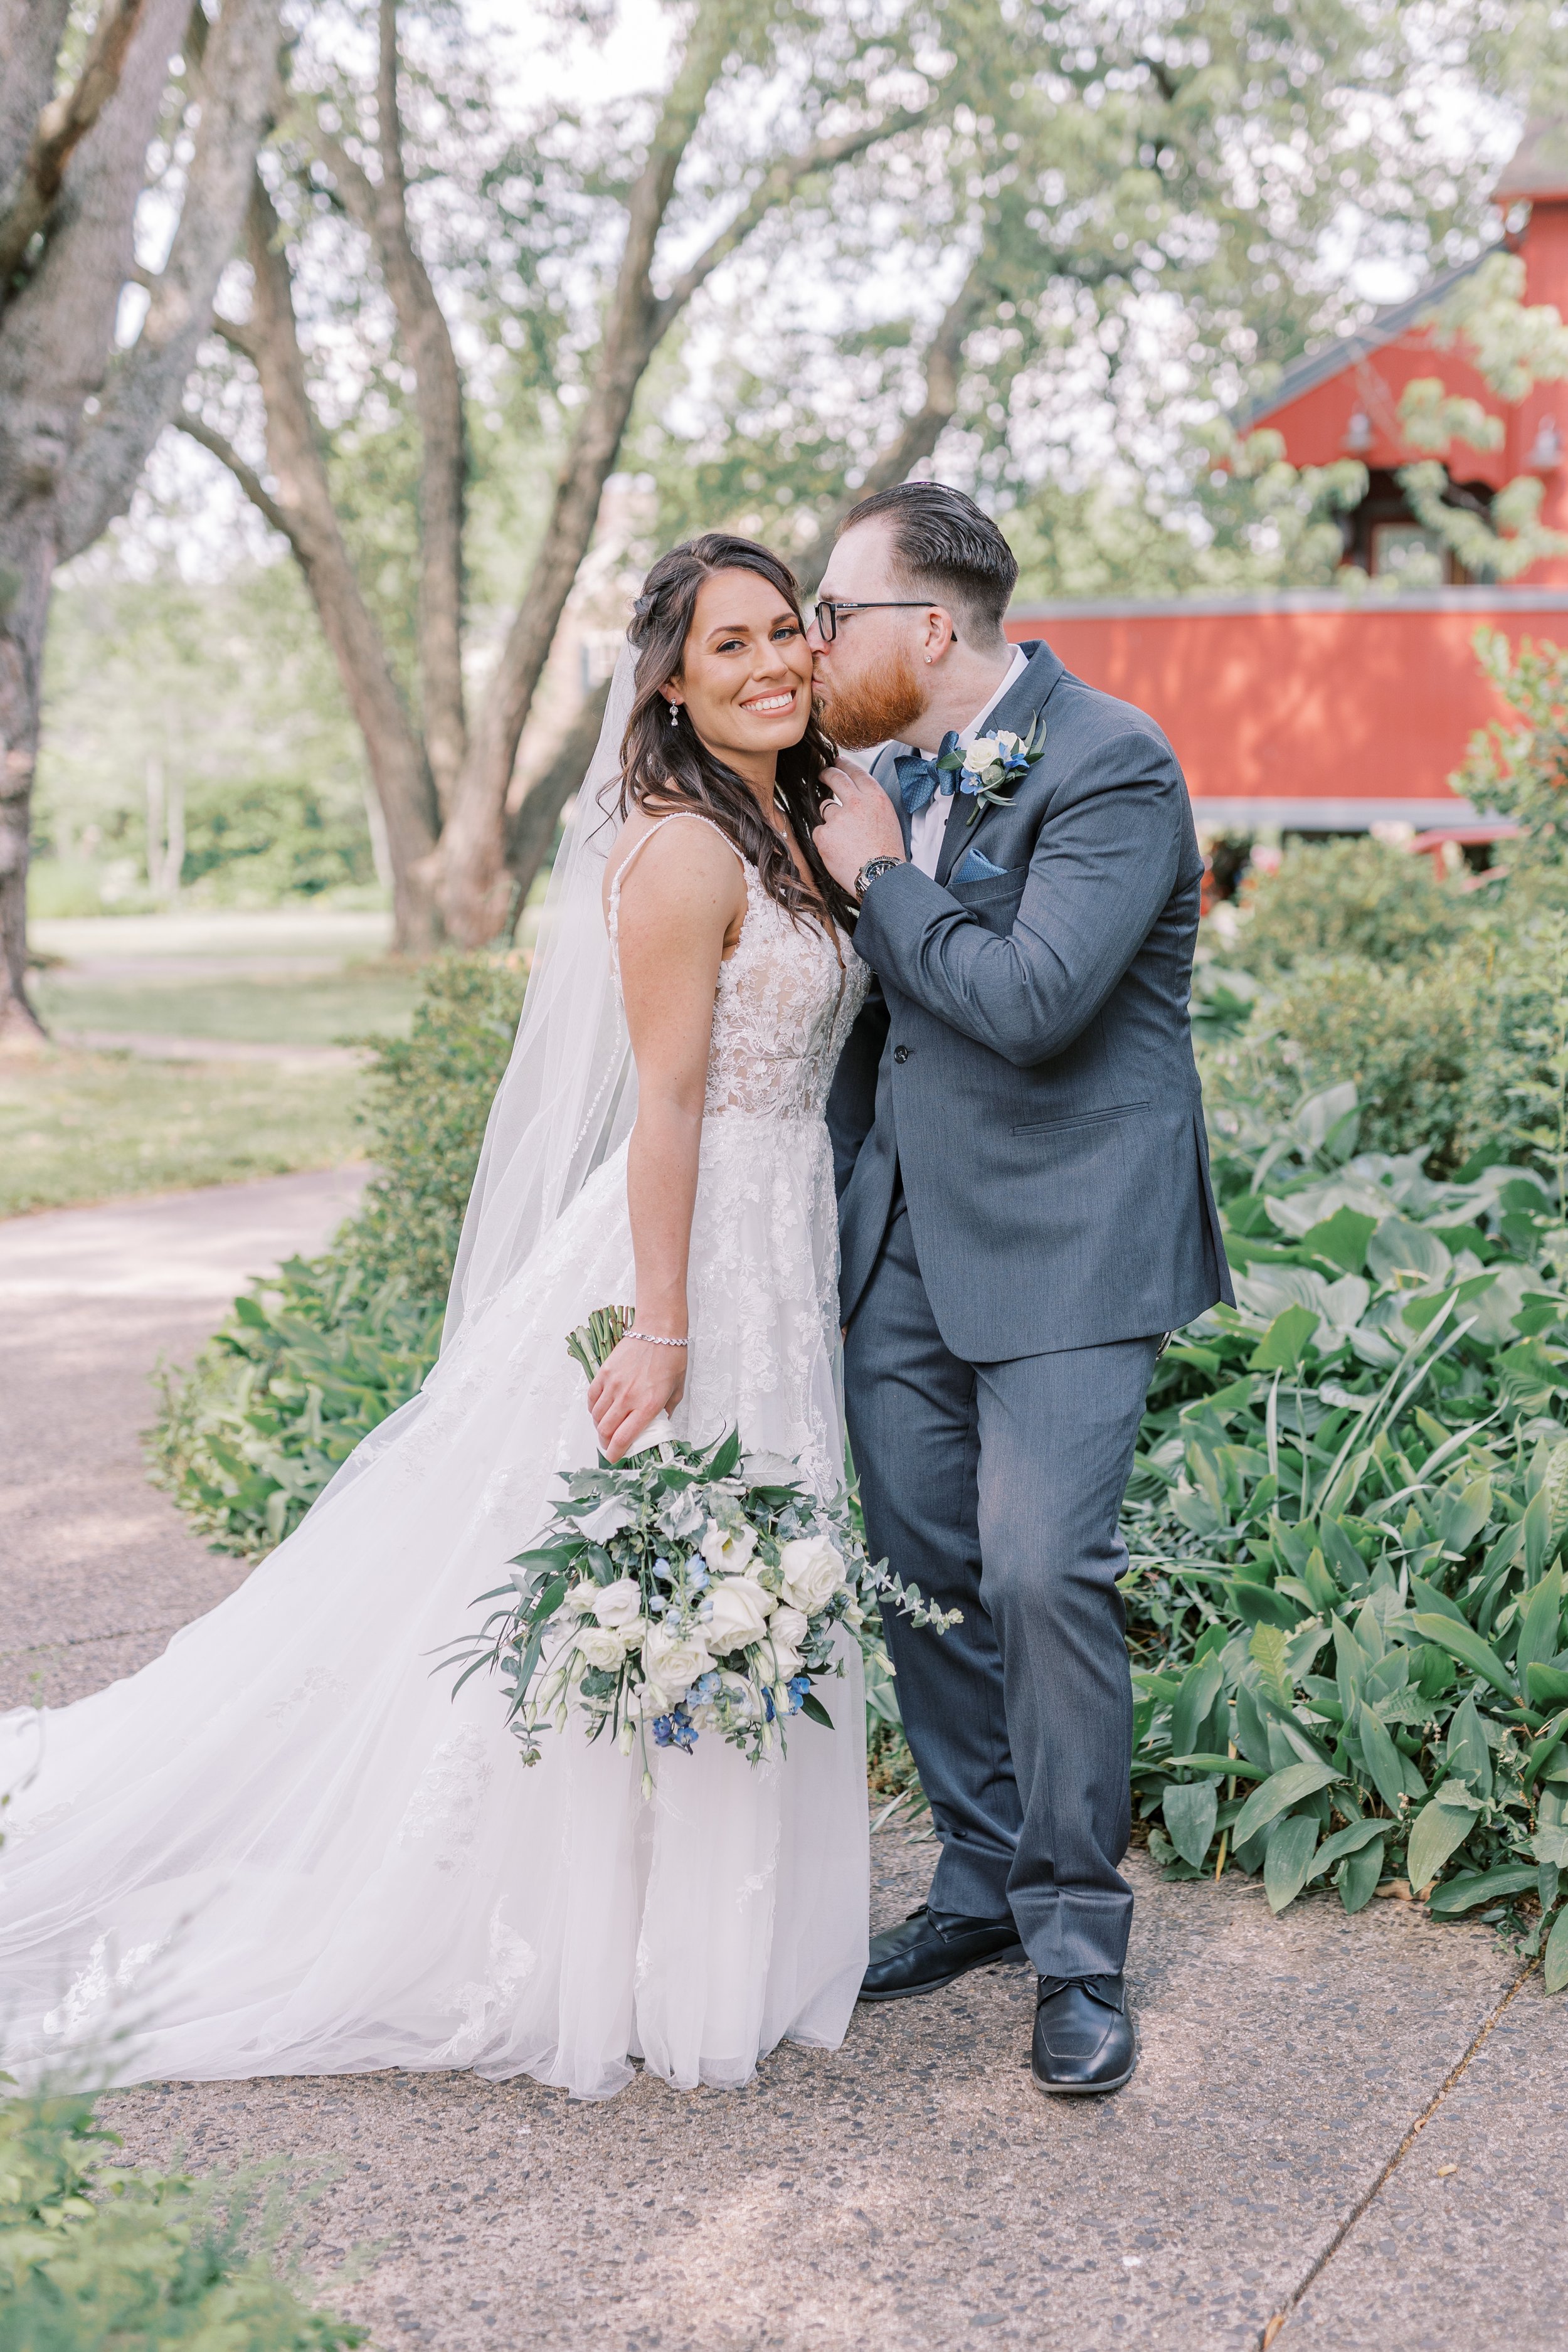 Jessica and Colby's Wedding at Pearl S Buck House